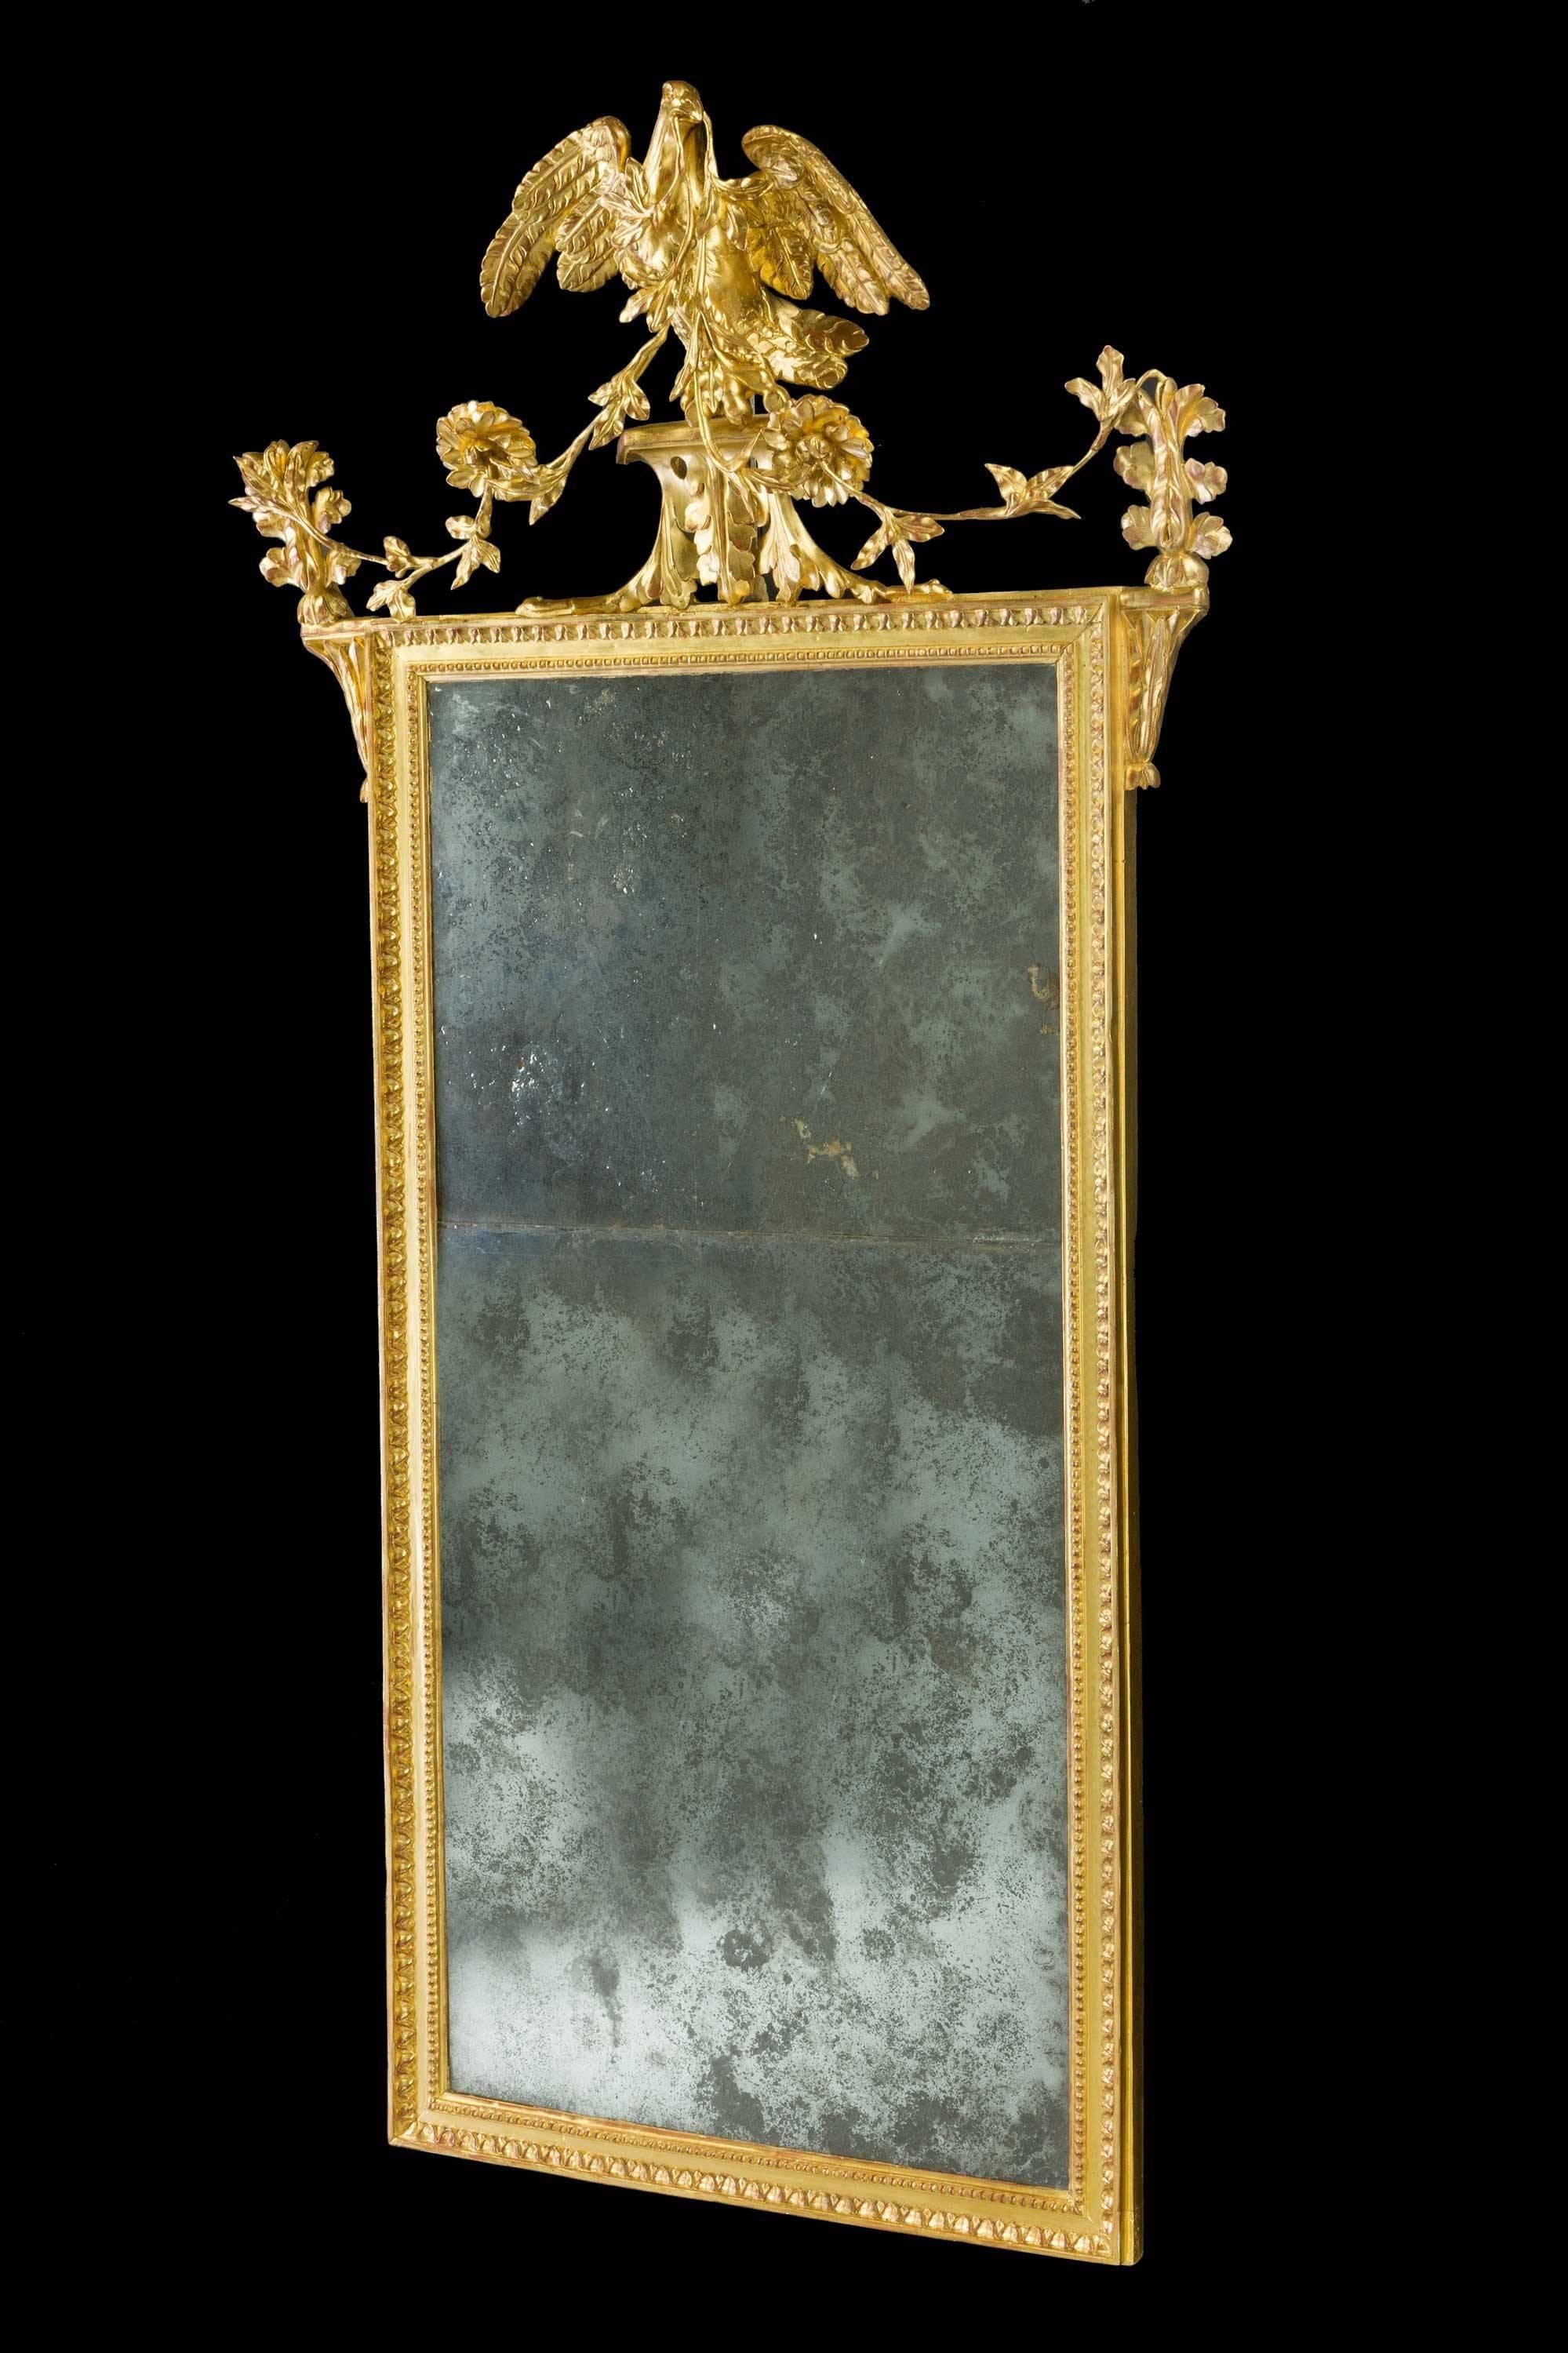 A late 18th century giltwood and carved mirror with an eagle or bird motif.